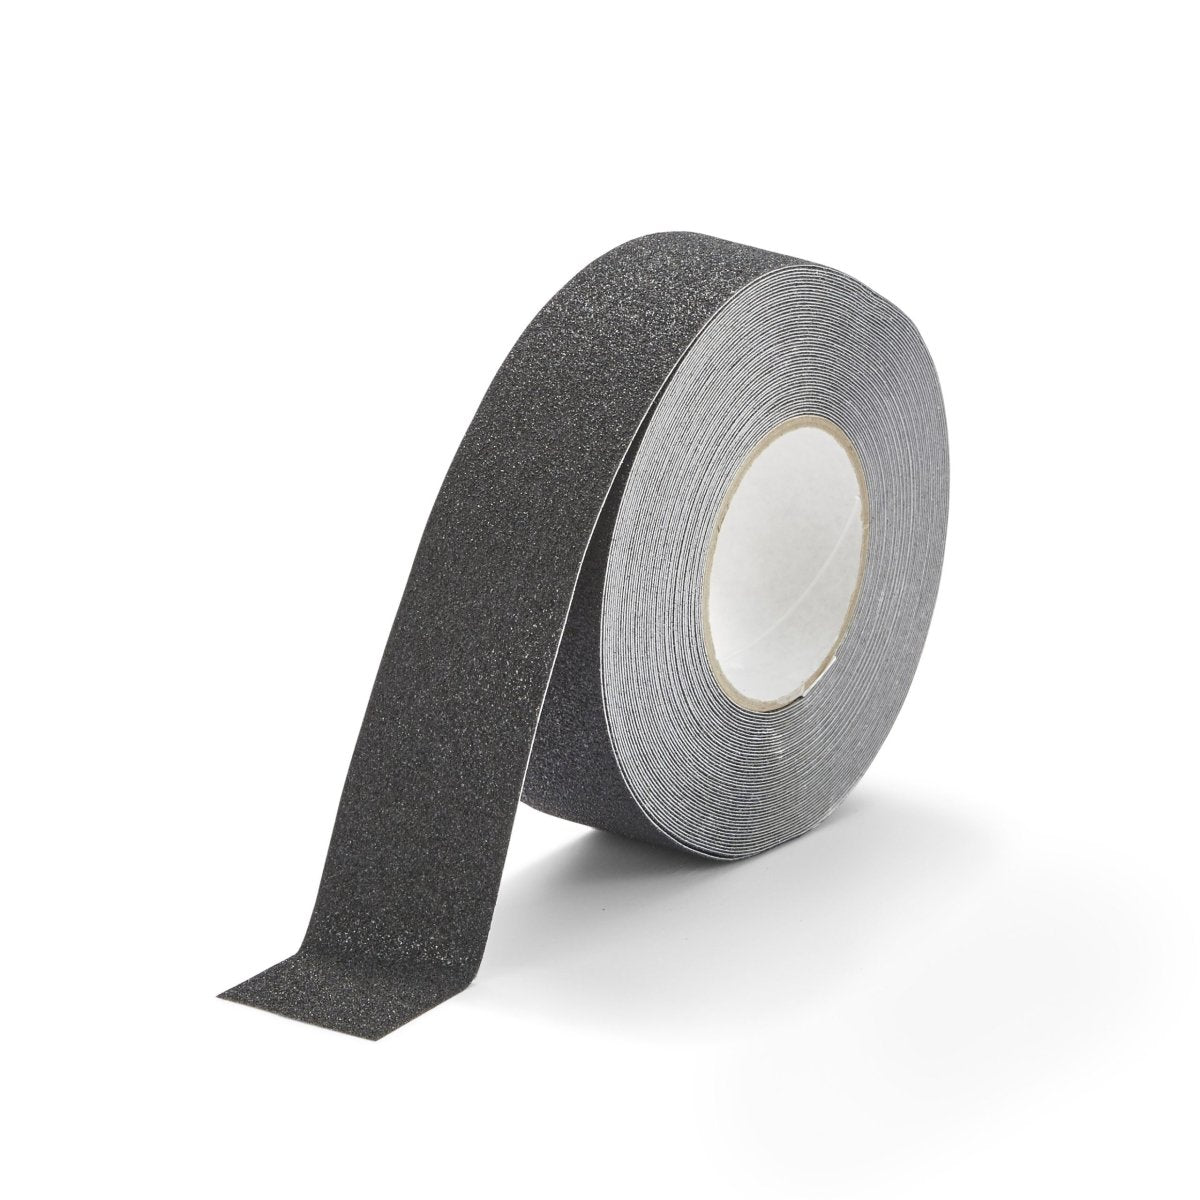 Conformable Traction Grade Anti Slip Tape Rolls - Slips Away - Conformable Anti-Slip Tape - H3406N-Conformable-Safety-Grip-Black-50mm-2-1 -